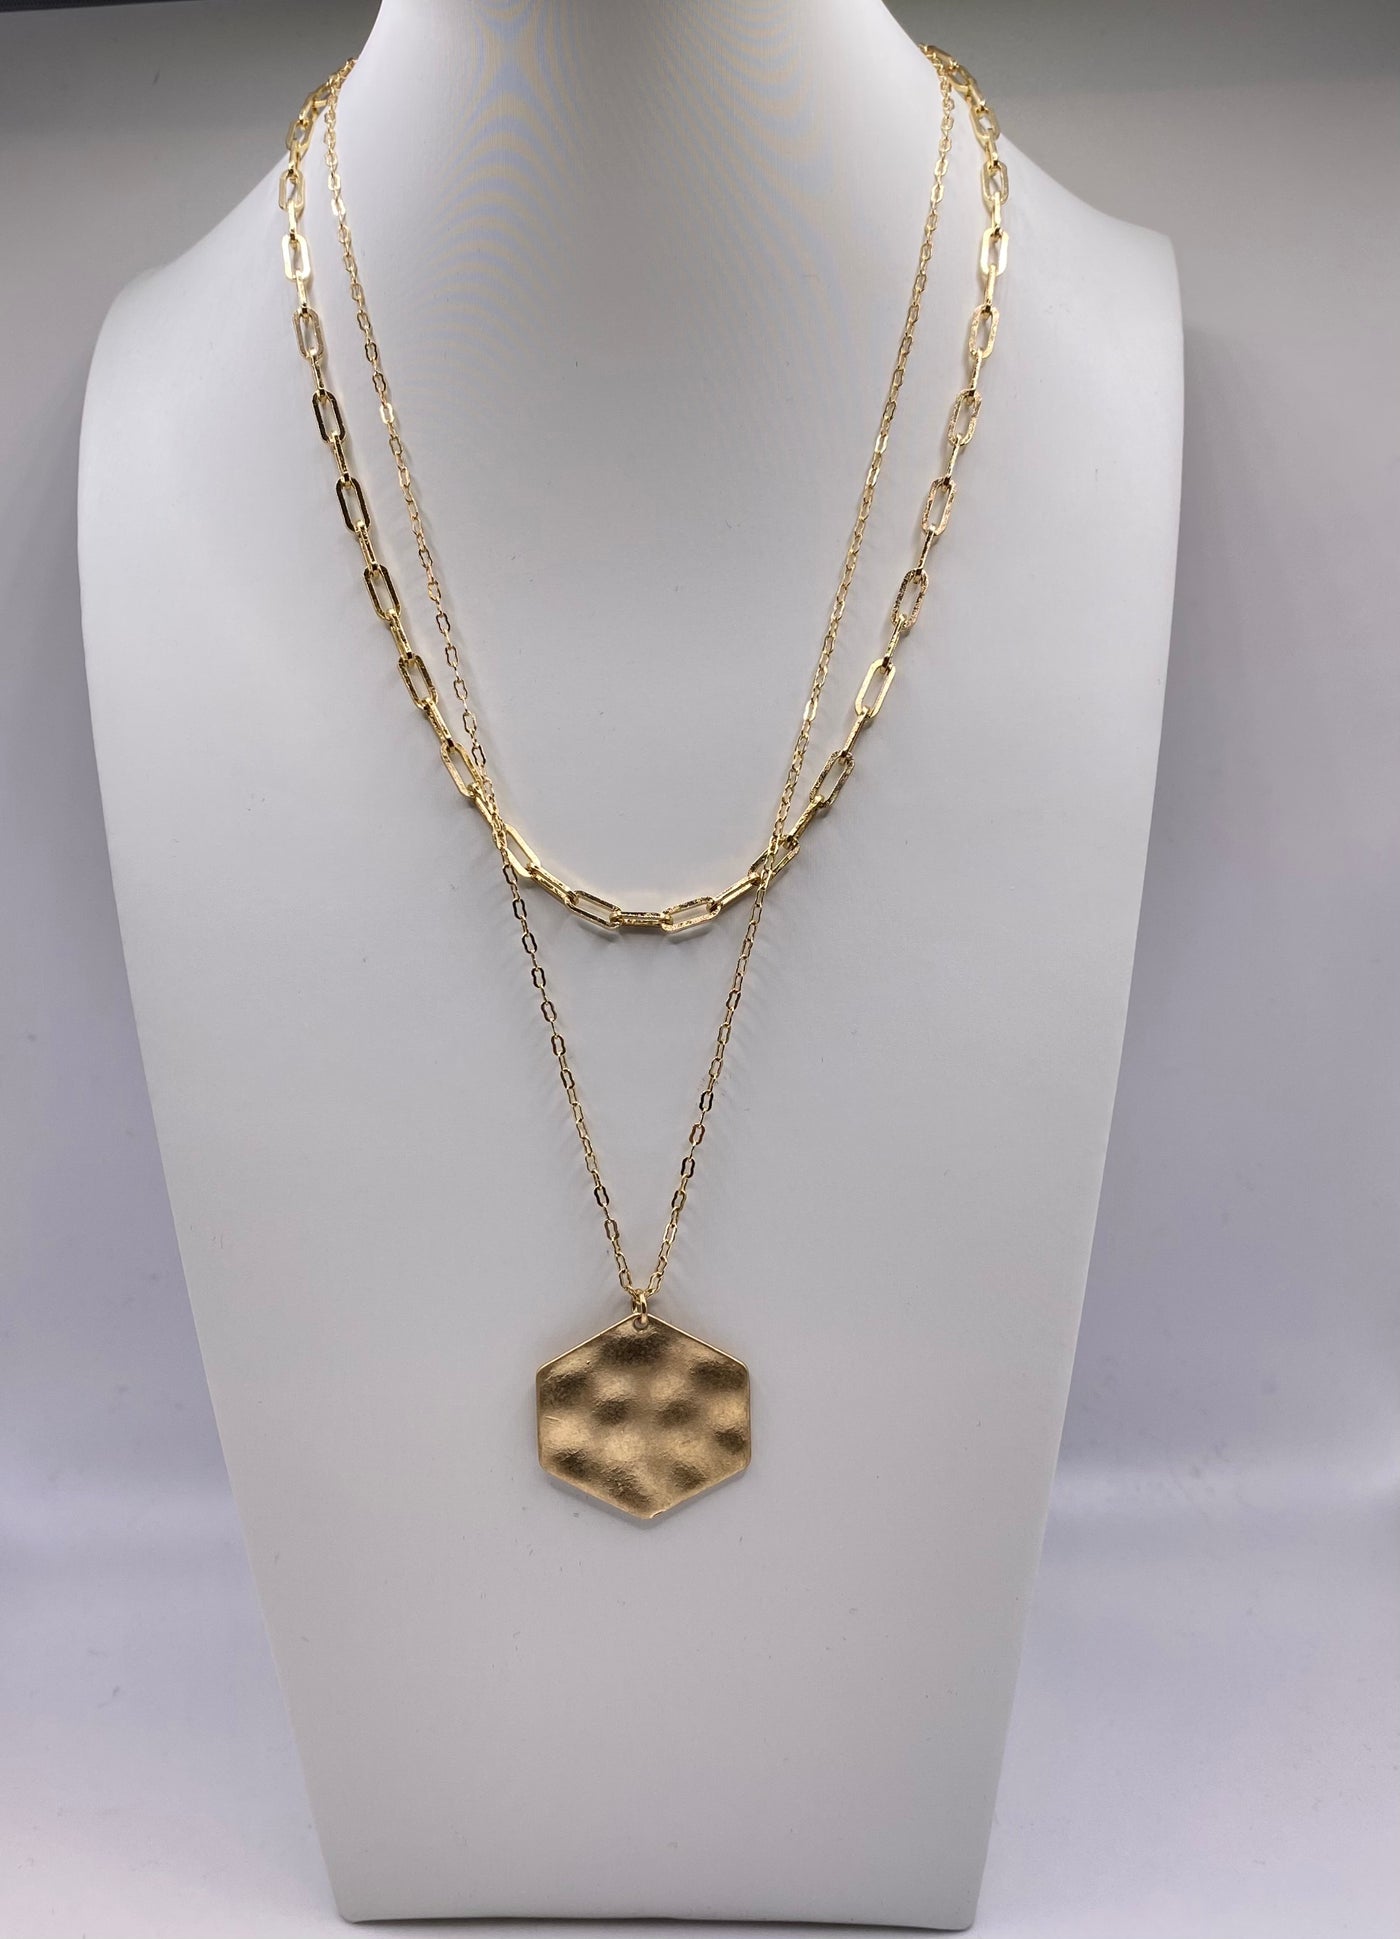 2 gold necklaces